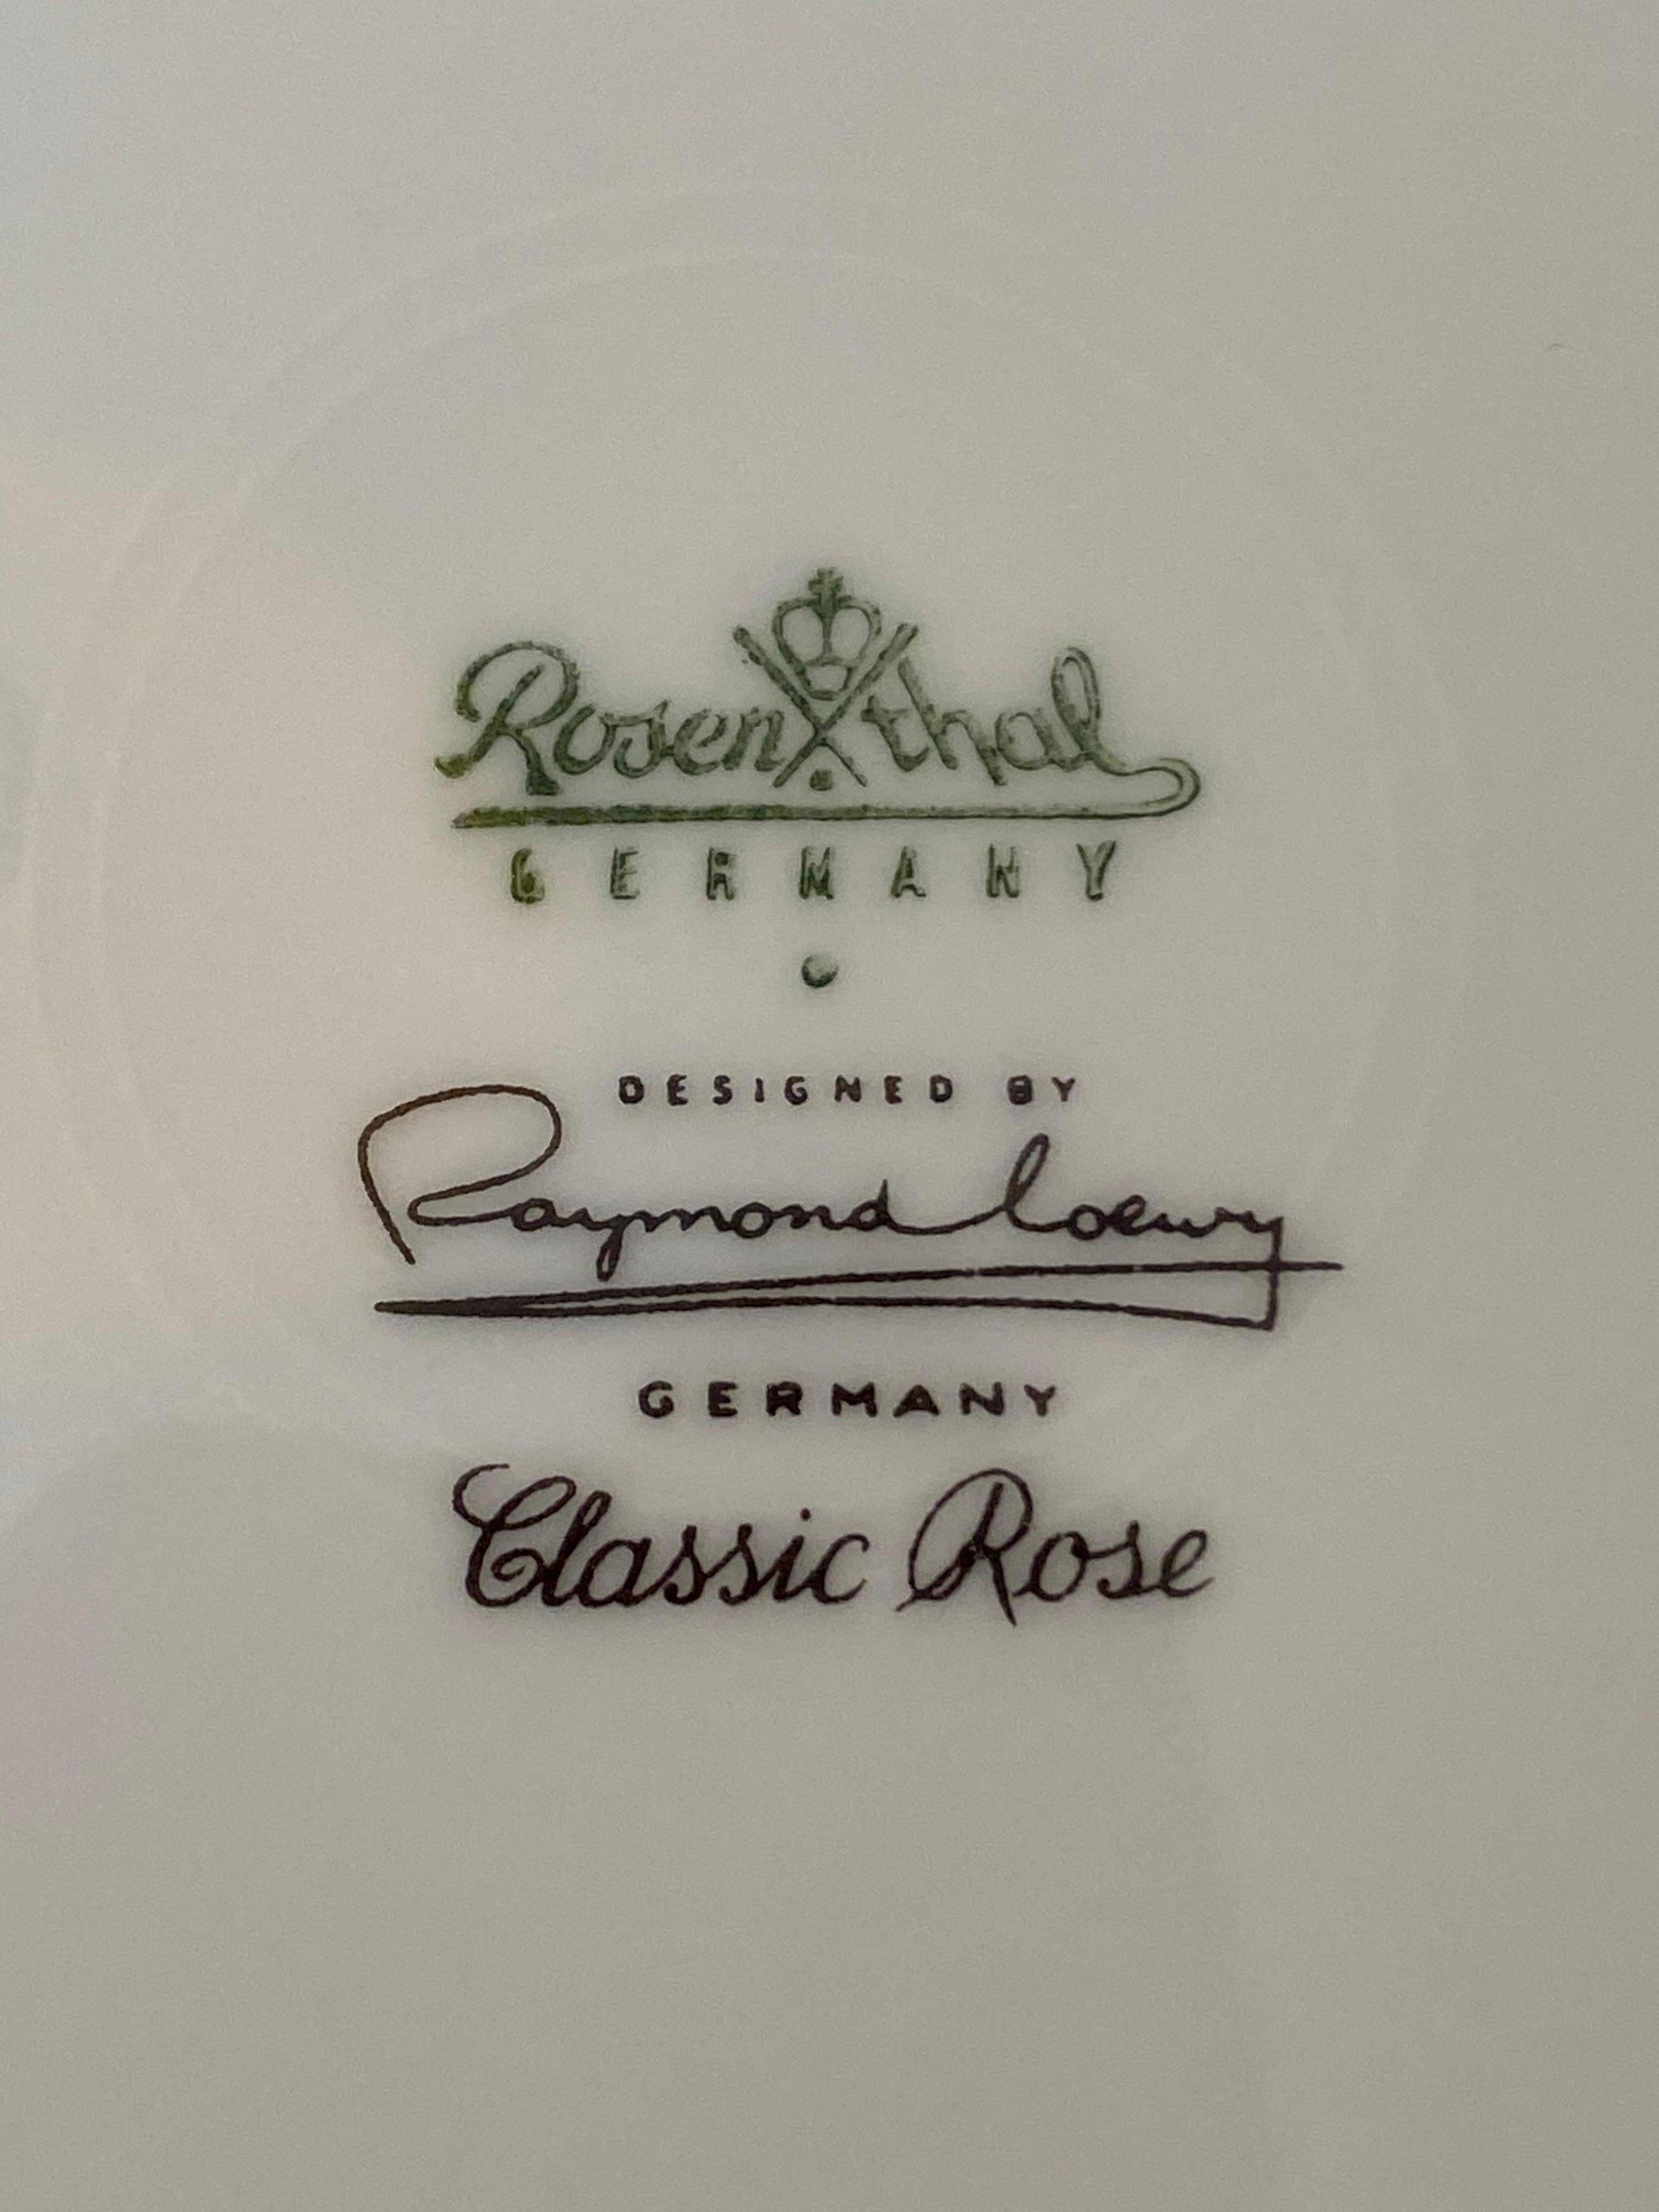 Porcelain Raymond Loewy Set of Dishes Classic Rose/  74 Pieces Rosenthal, Germany